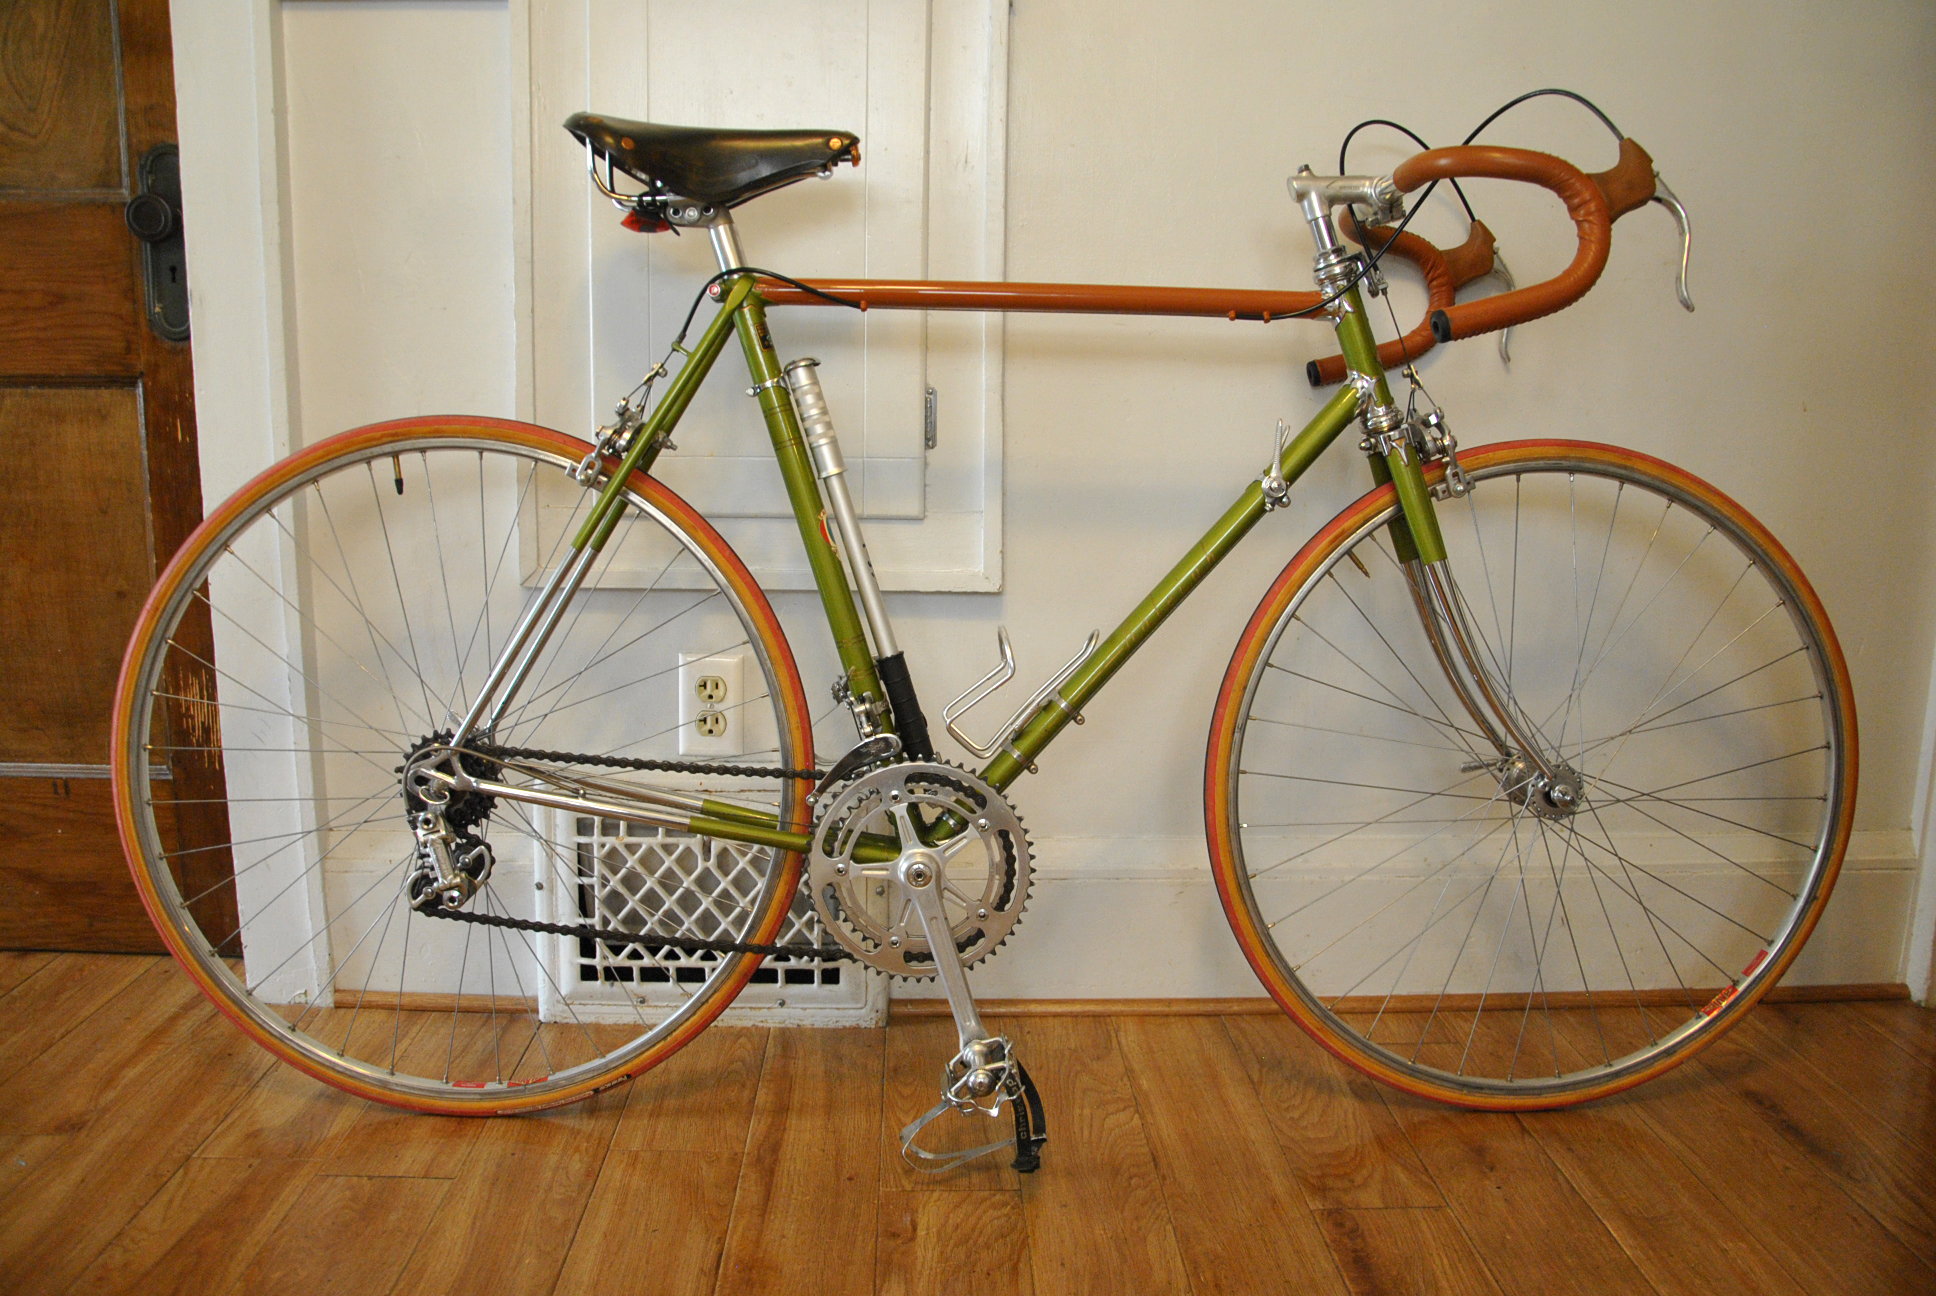 72 Raleigh International with top tube repaint. Warning ...